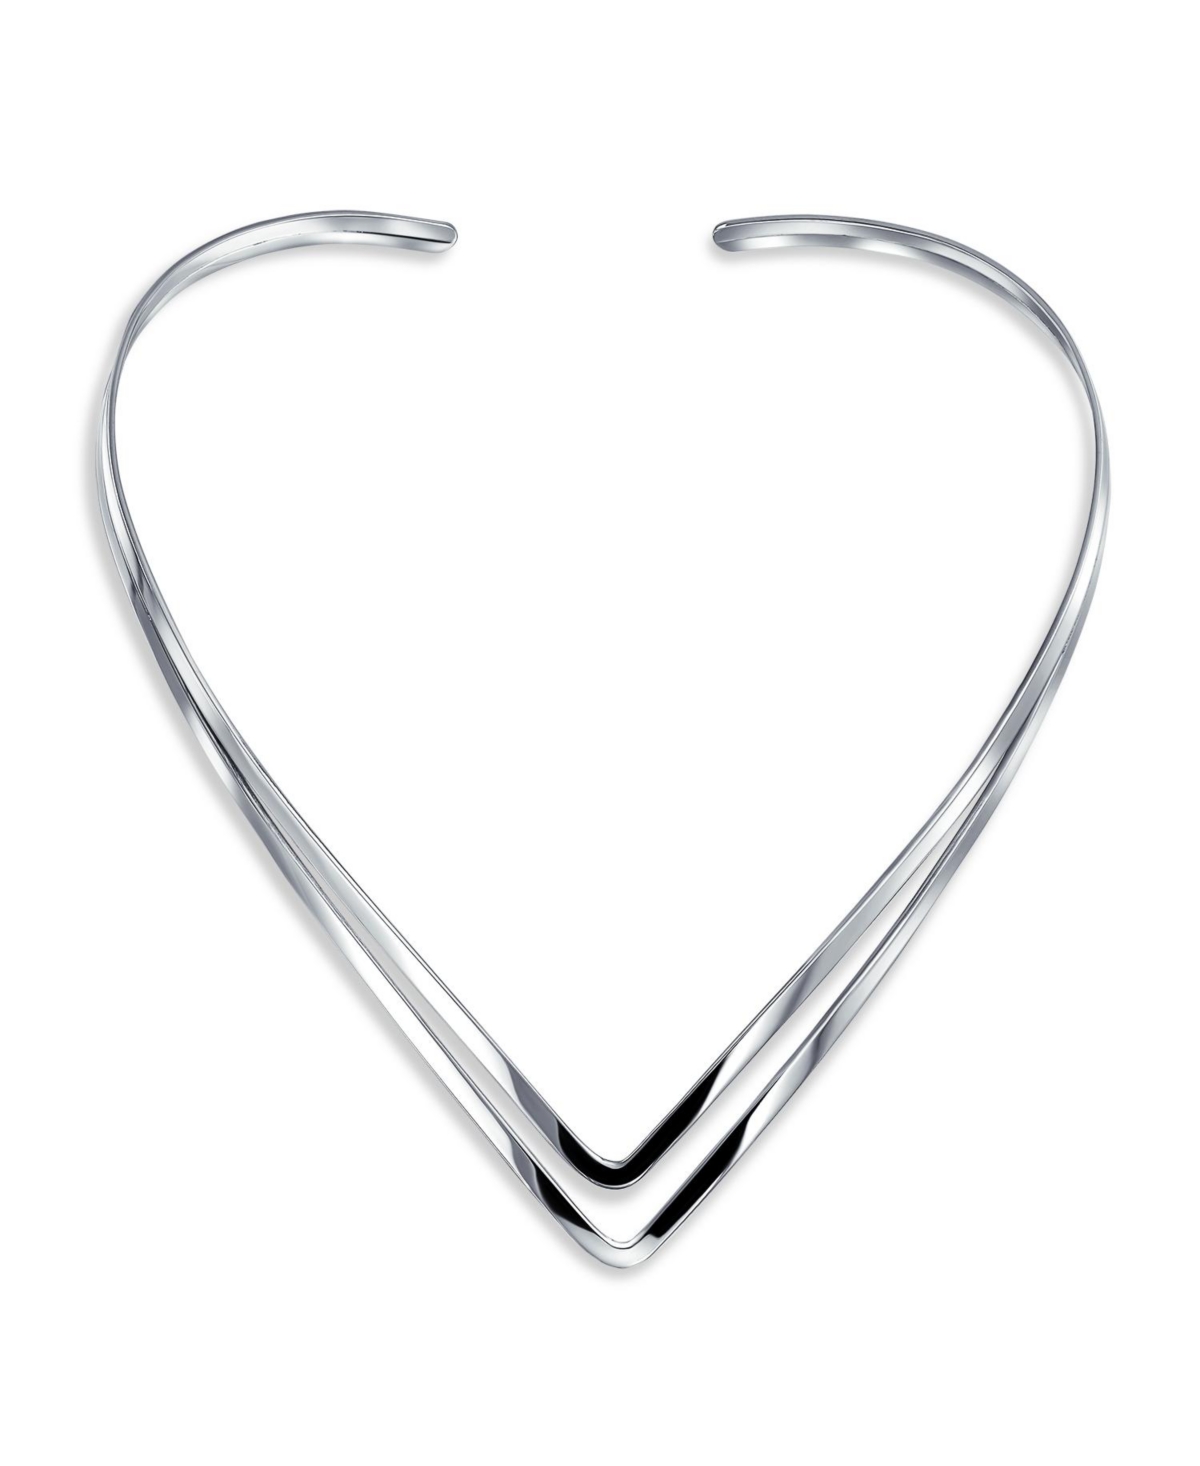 Basic Simple Choker Double V Shape Geometric Collar Statement Necklace For Women .925 Silver Sterling - Silver